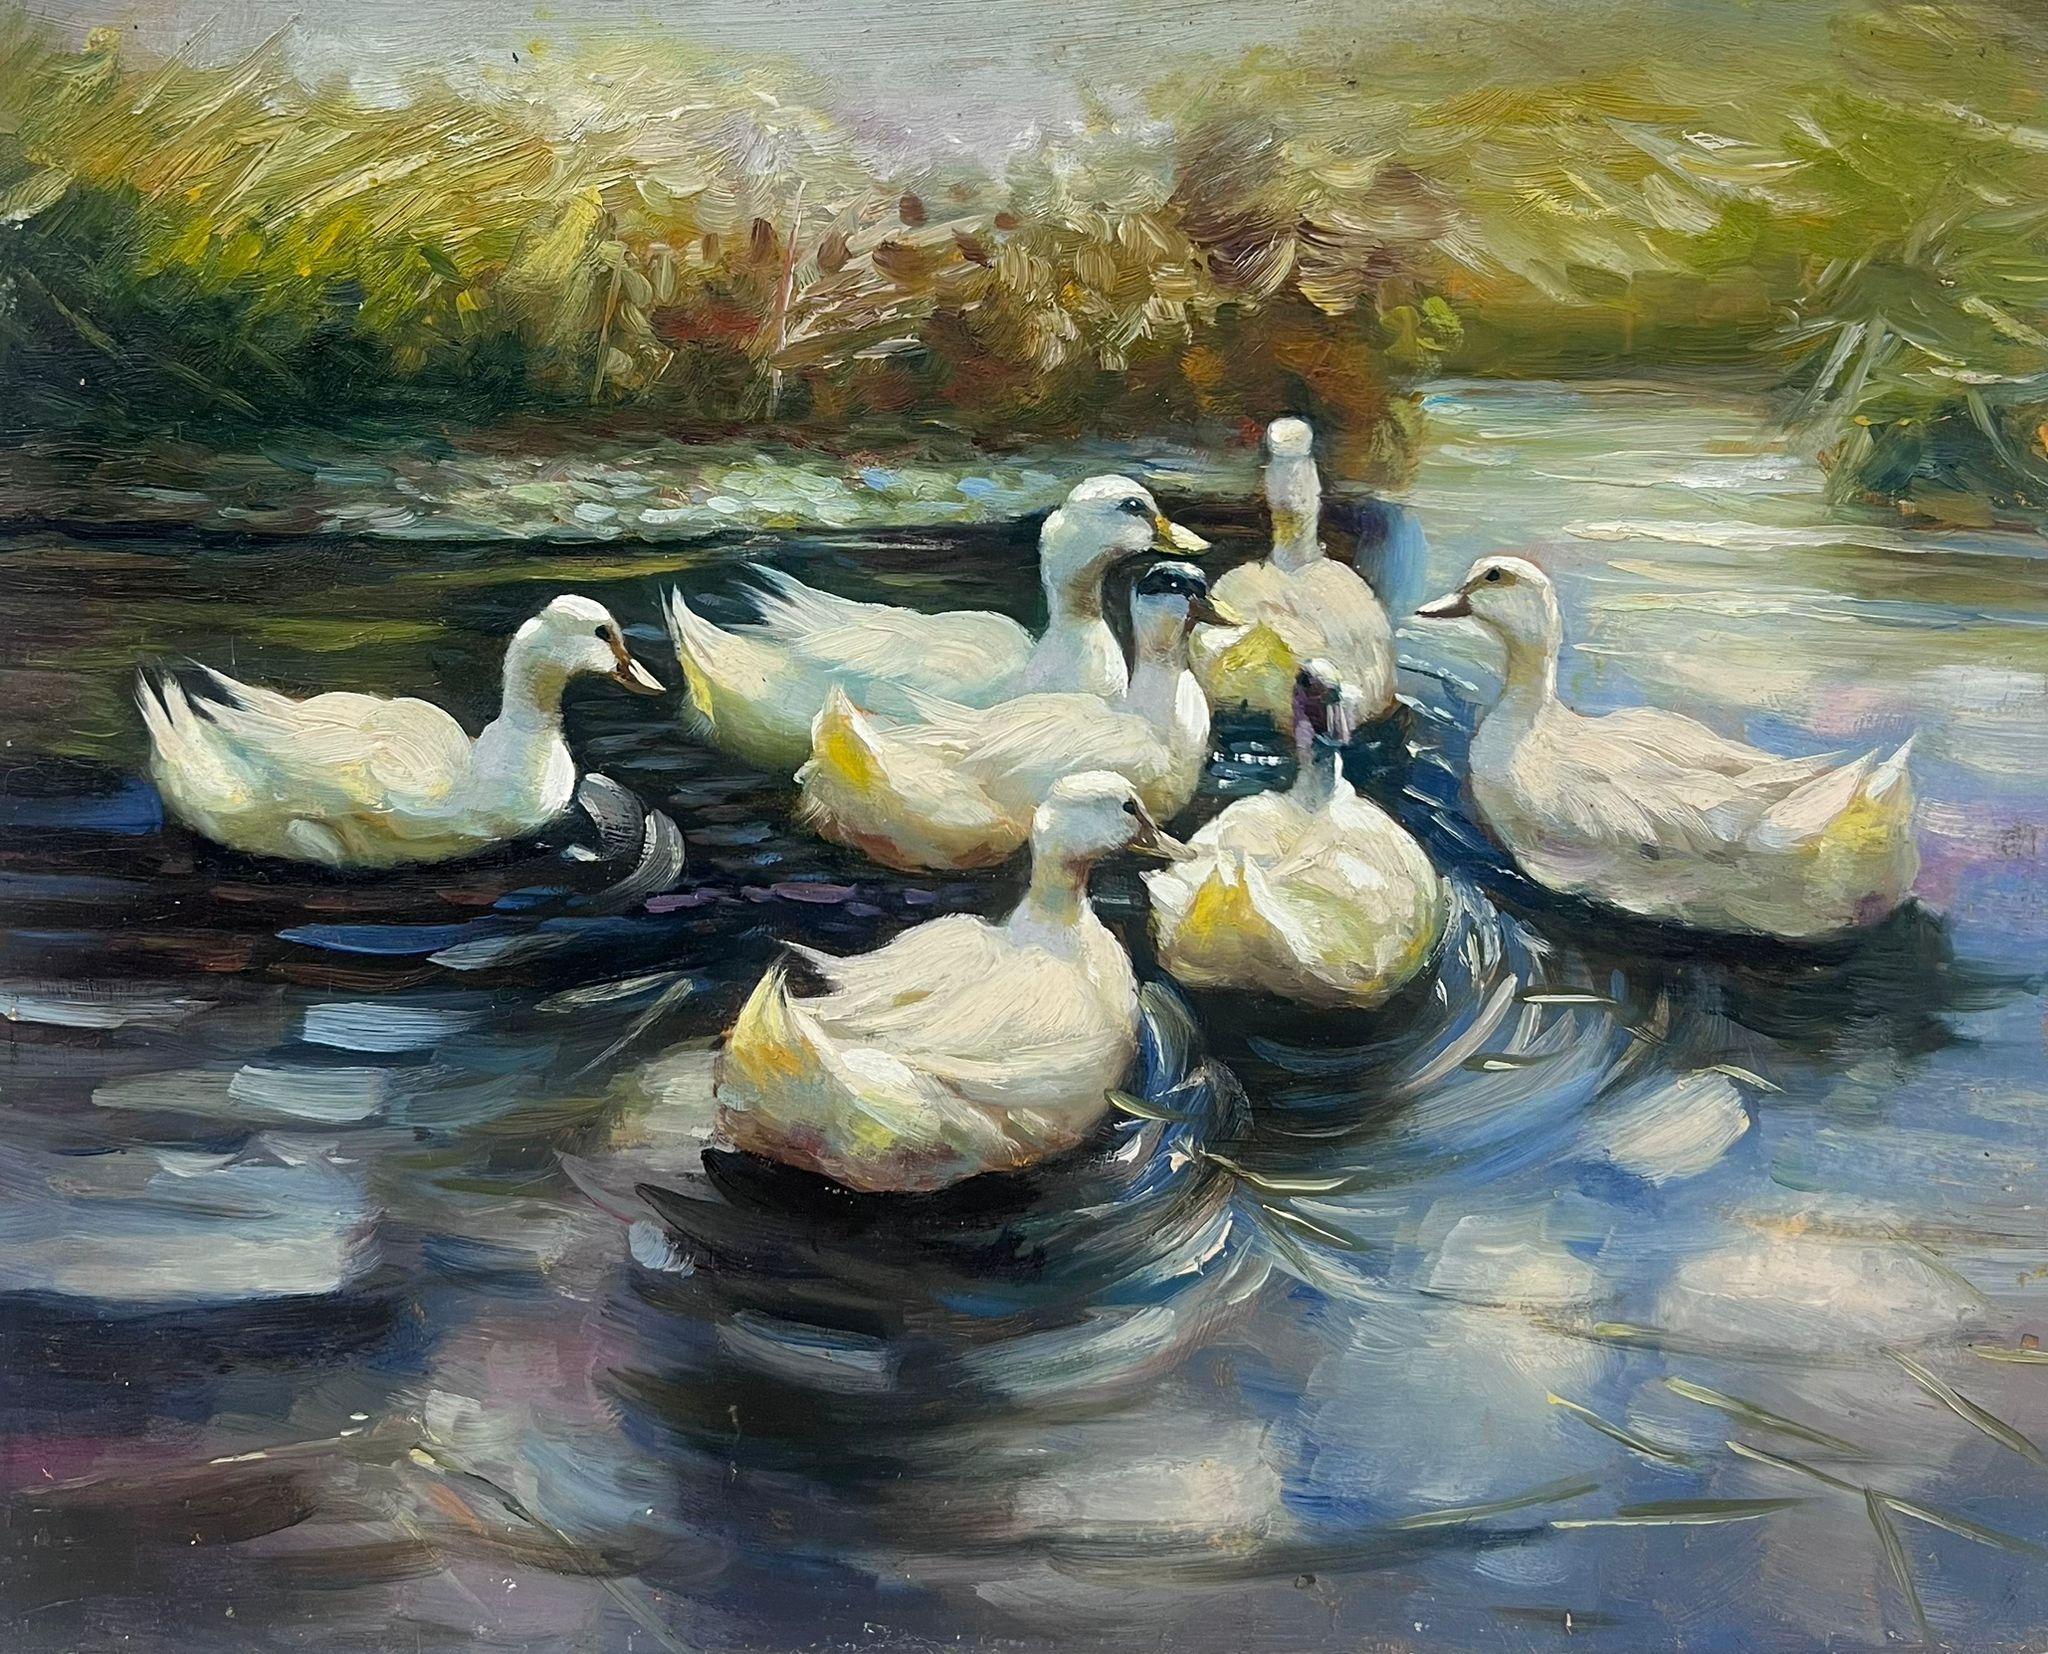 Swimming Ducks
English Impressionist, 21st century
oil on board, unframed
board : 8 x 10 inches
provenance: private collection, UK
condition: very good and sound condition 